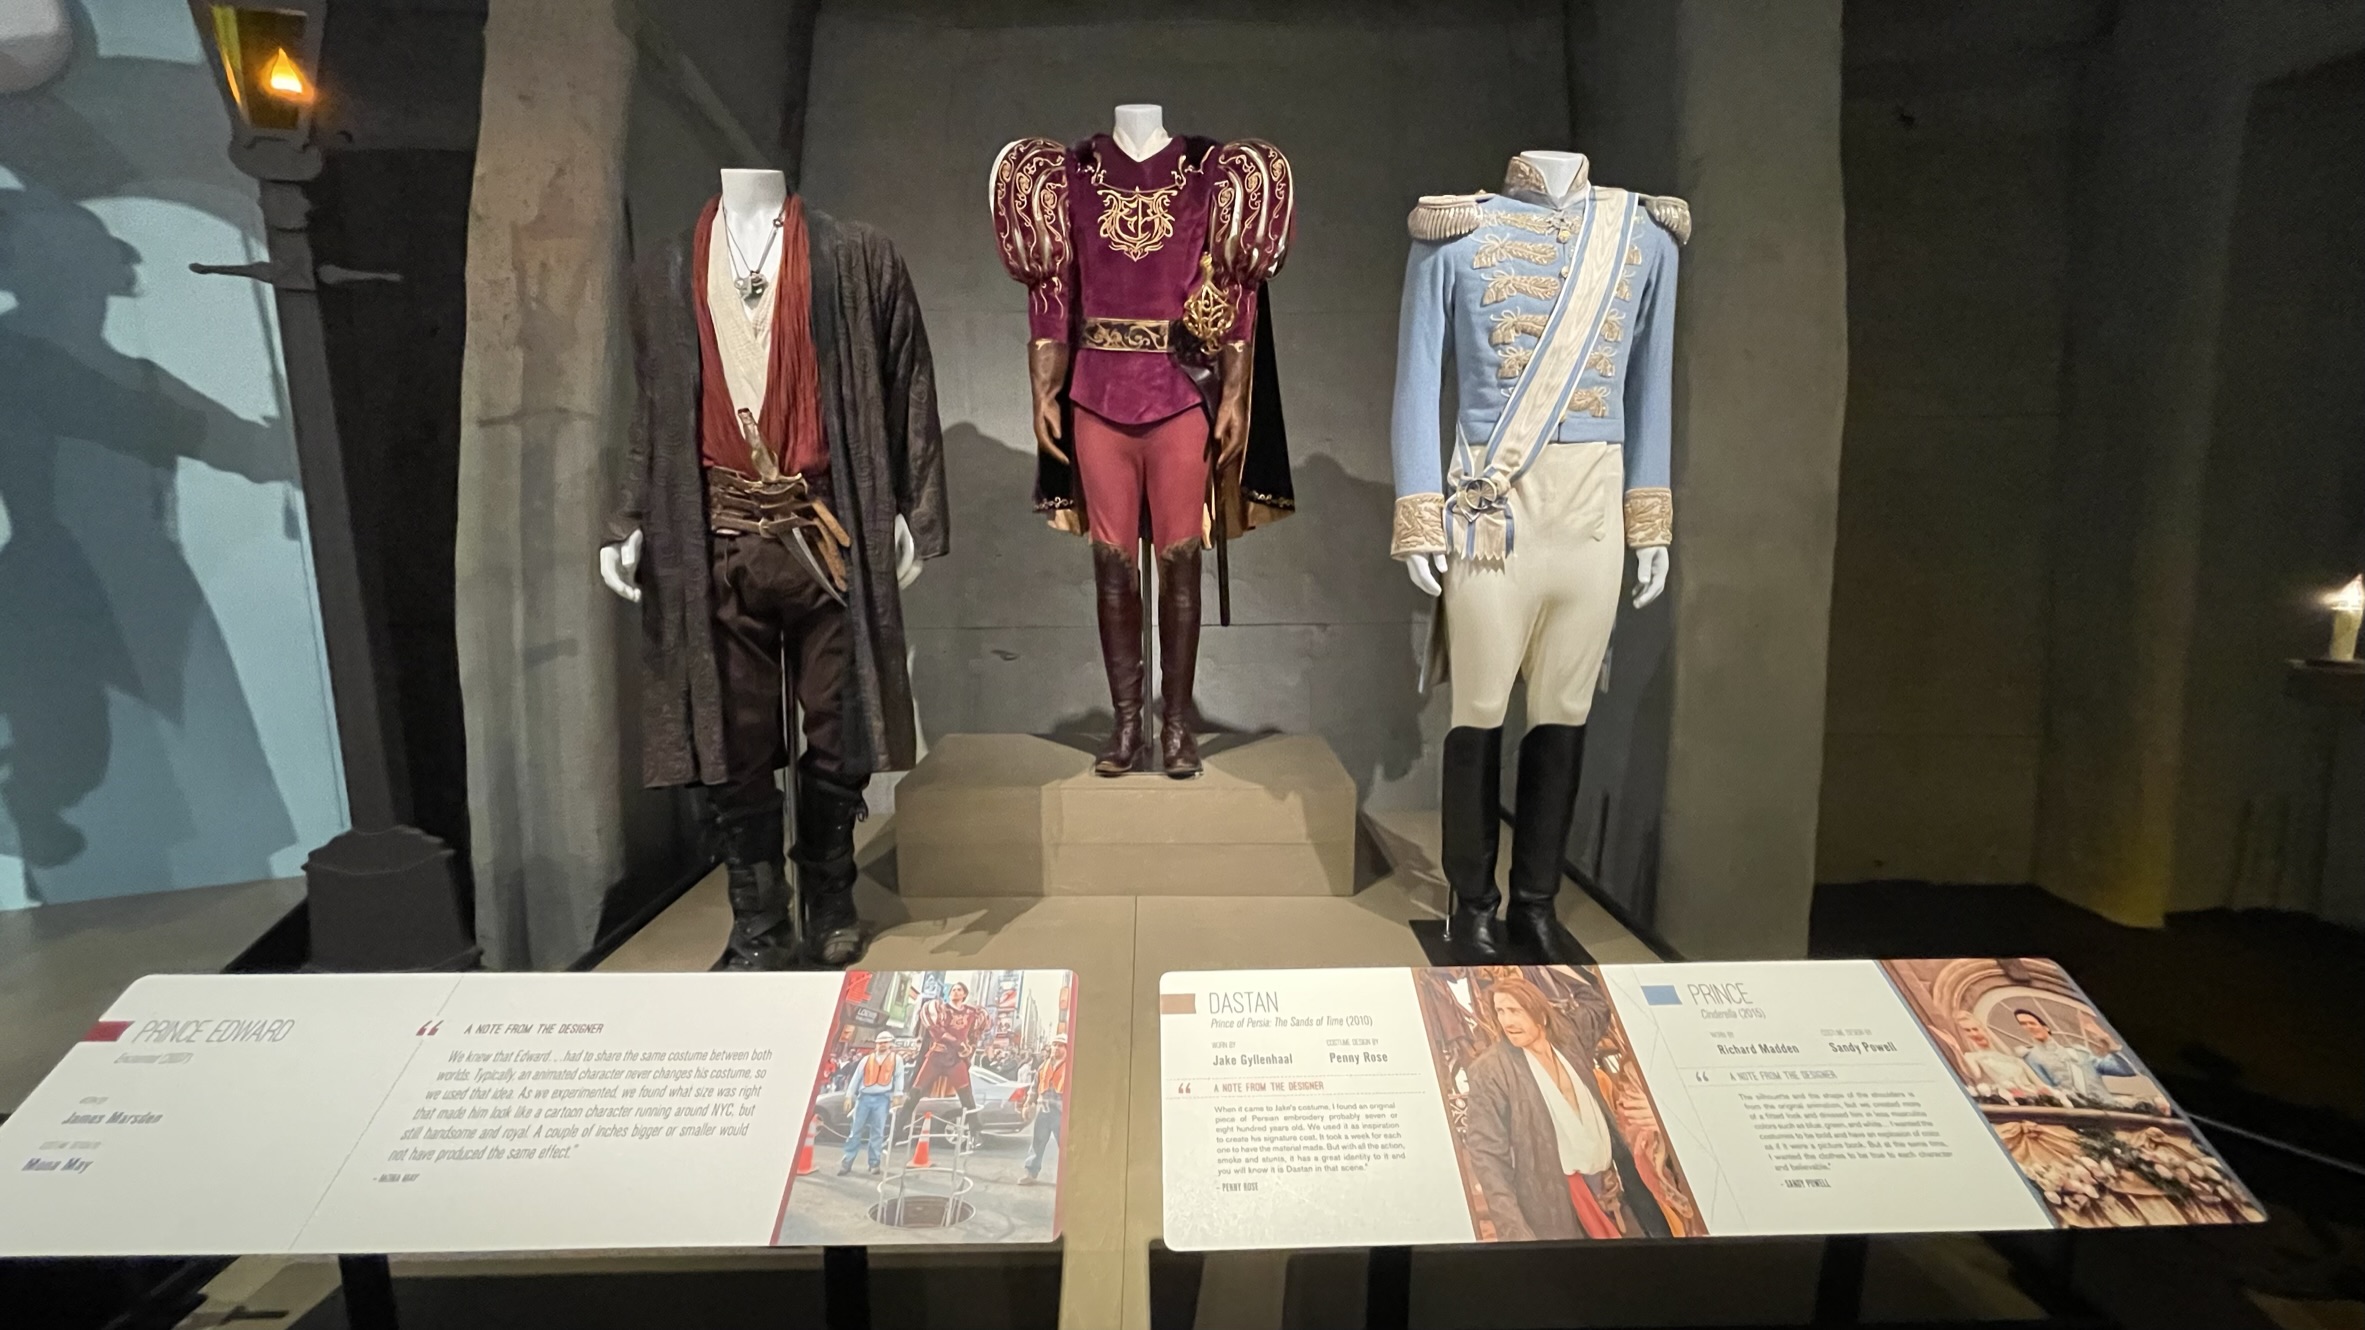 Disney Archives Disney Heroes & Villains: The Art of the Disney Costume 'Cinderella's Workshop Disney Costumes include Prince Edward, Dastan and Prince